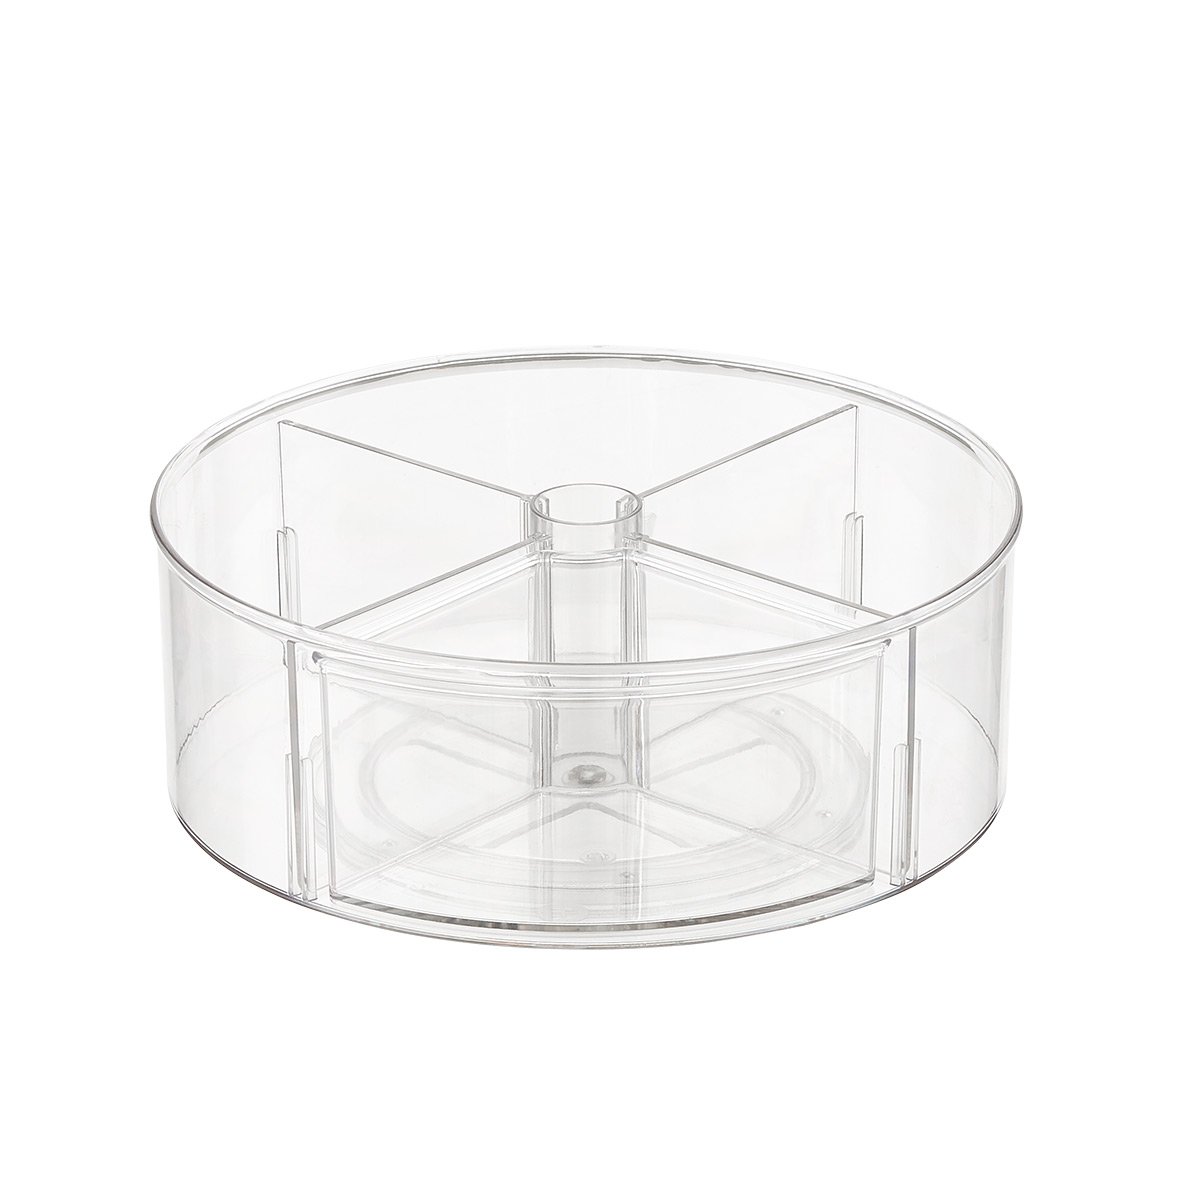 The Container Store Shelf Divider Clear, 1-3/4 x 12-1/2 x 9-1/2 H